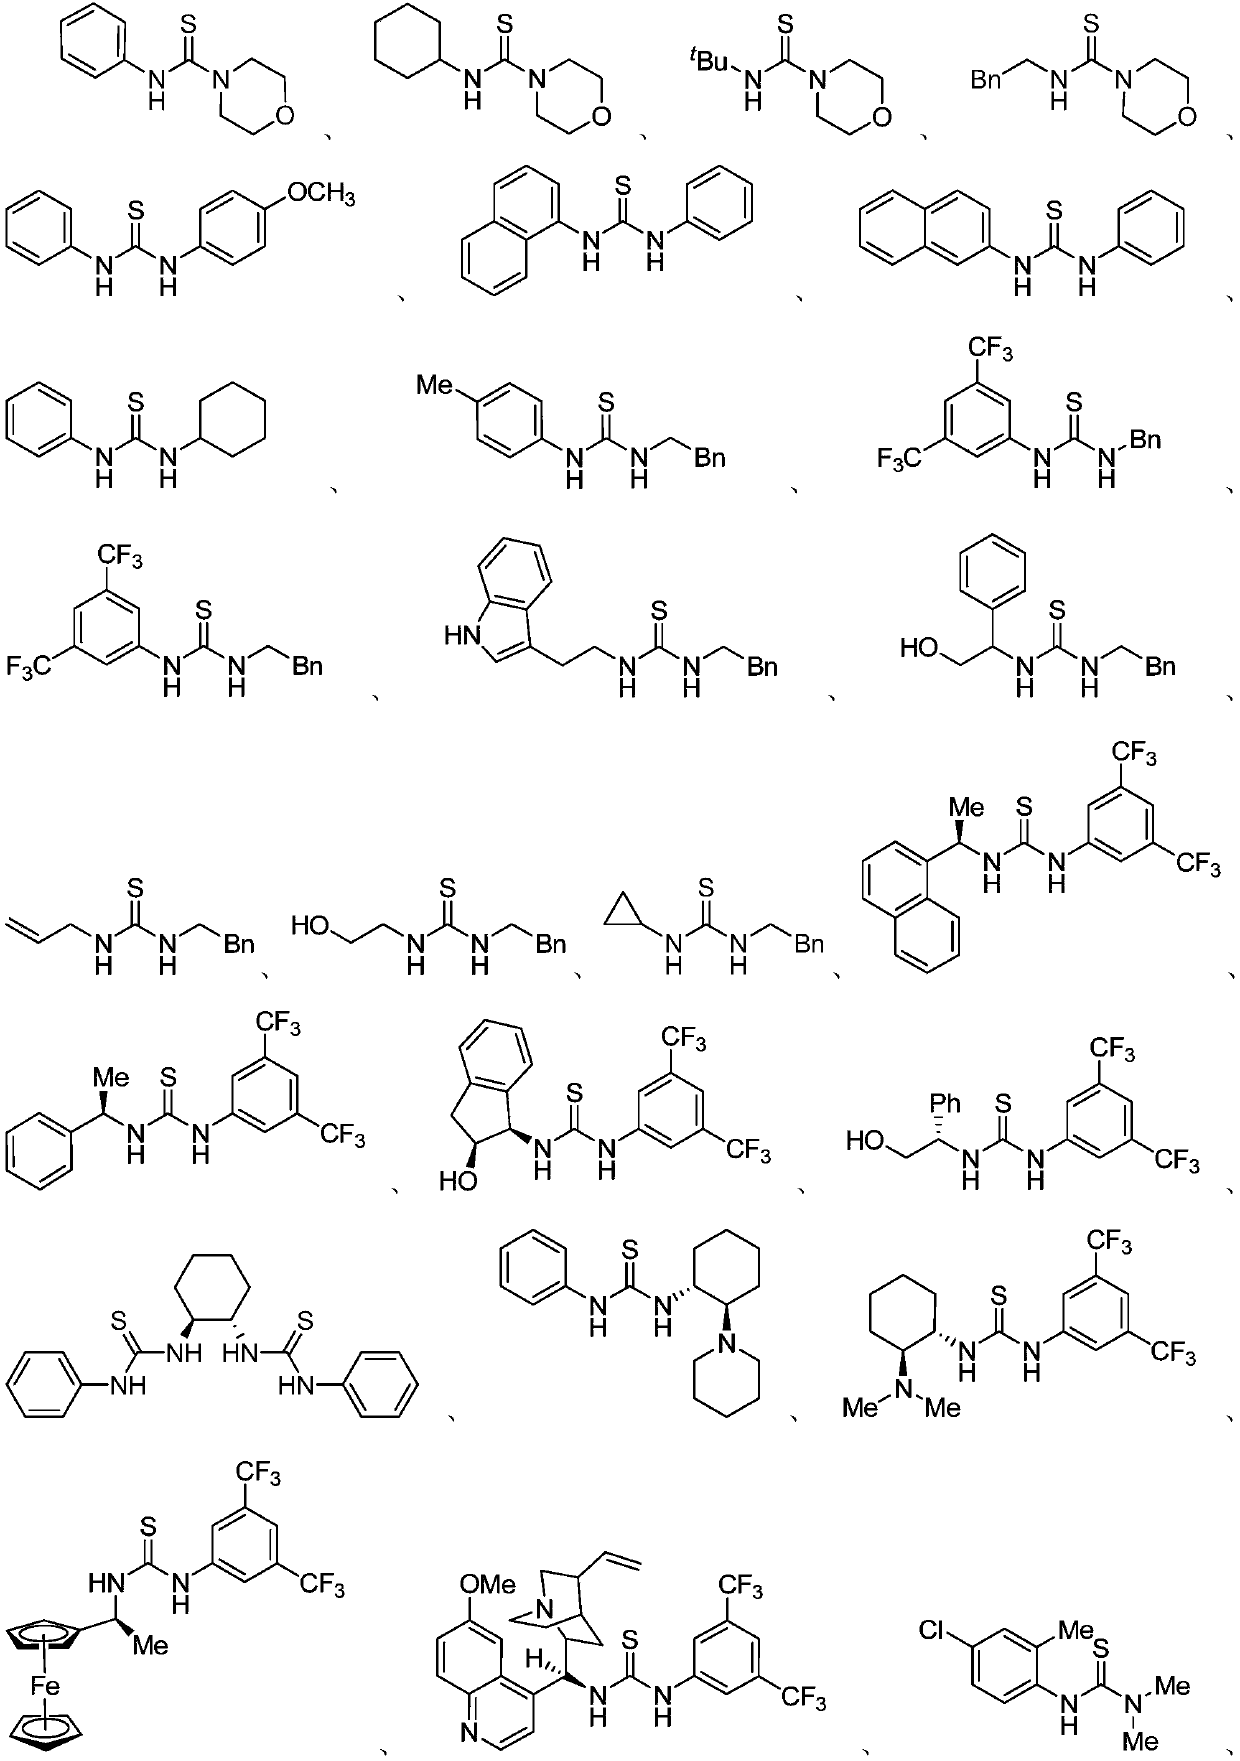 Thiourea and oxazolidinethione compounds and their synthesis method and application